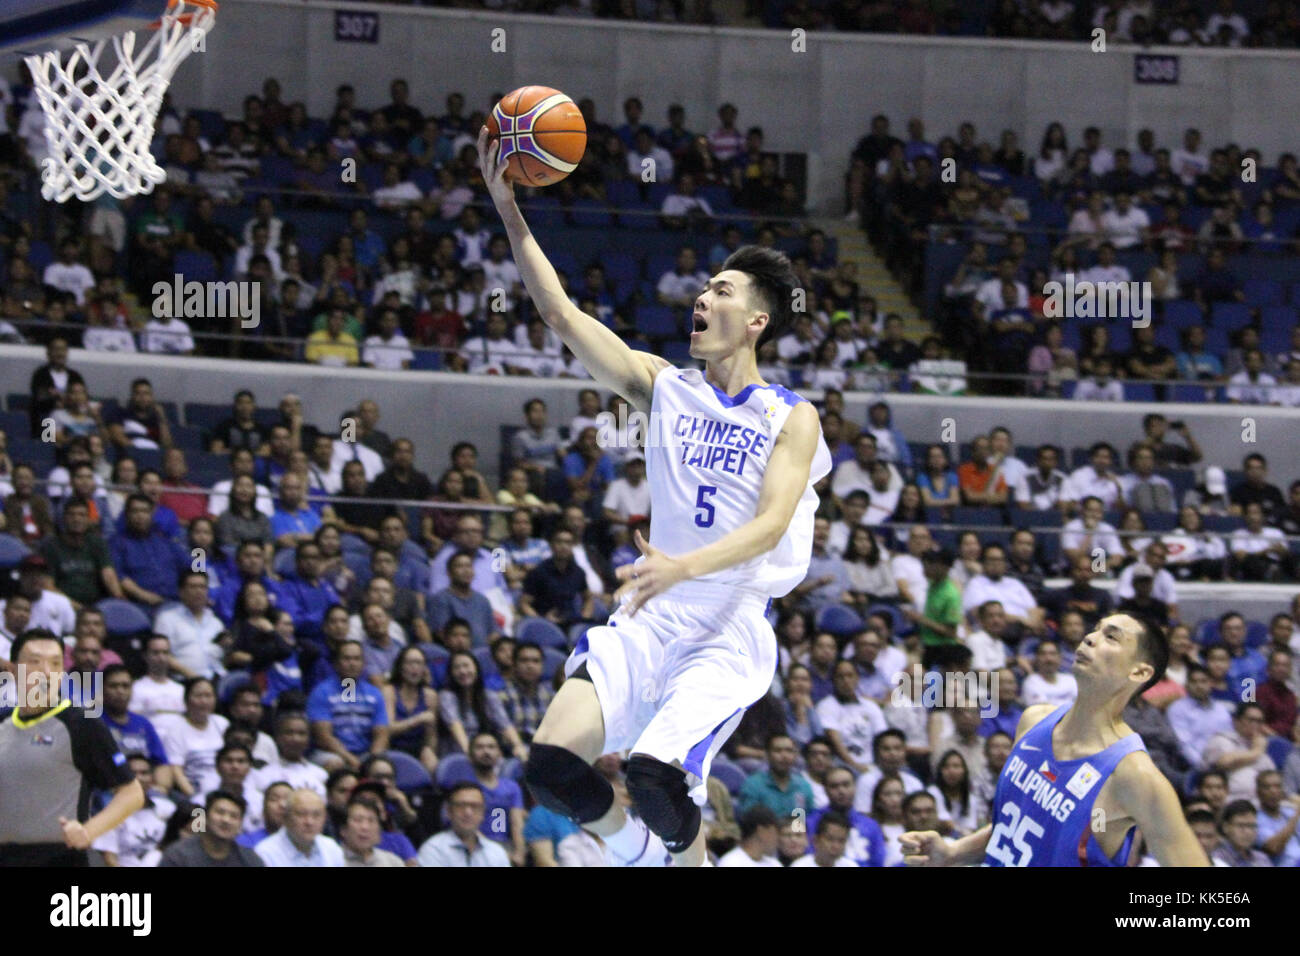 Quezon City, Philippines. 27th Nov, 2017. Chen Liu (5) of Chinese Taipei soars for an open lay-up during thier FIBA World Cup Qualifiers against the Philippines. Gilas Pilipinas defeated the visiting Chinese Taipei team 90-83 to complete a sweep of their first two assignments in the FIBA 2019 World Cup qualifiers. Credit: Dennis Jerome Acosta/ Pacific Press/Alamy Live News Stock Photo